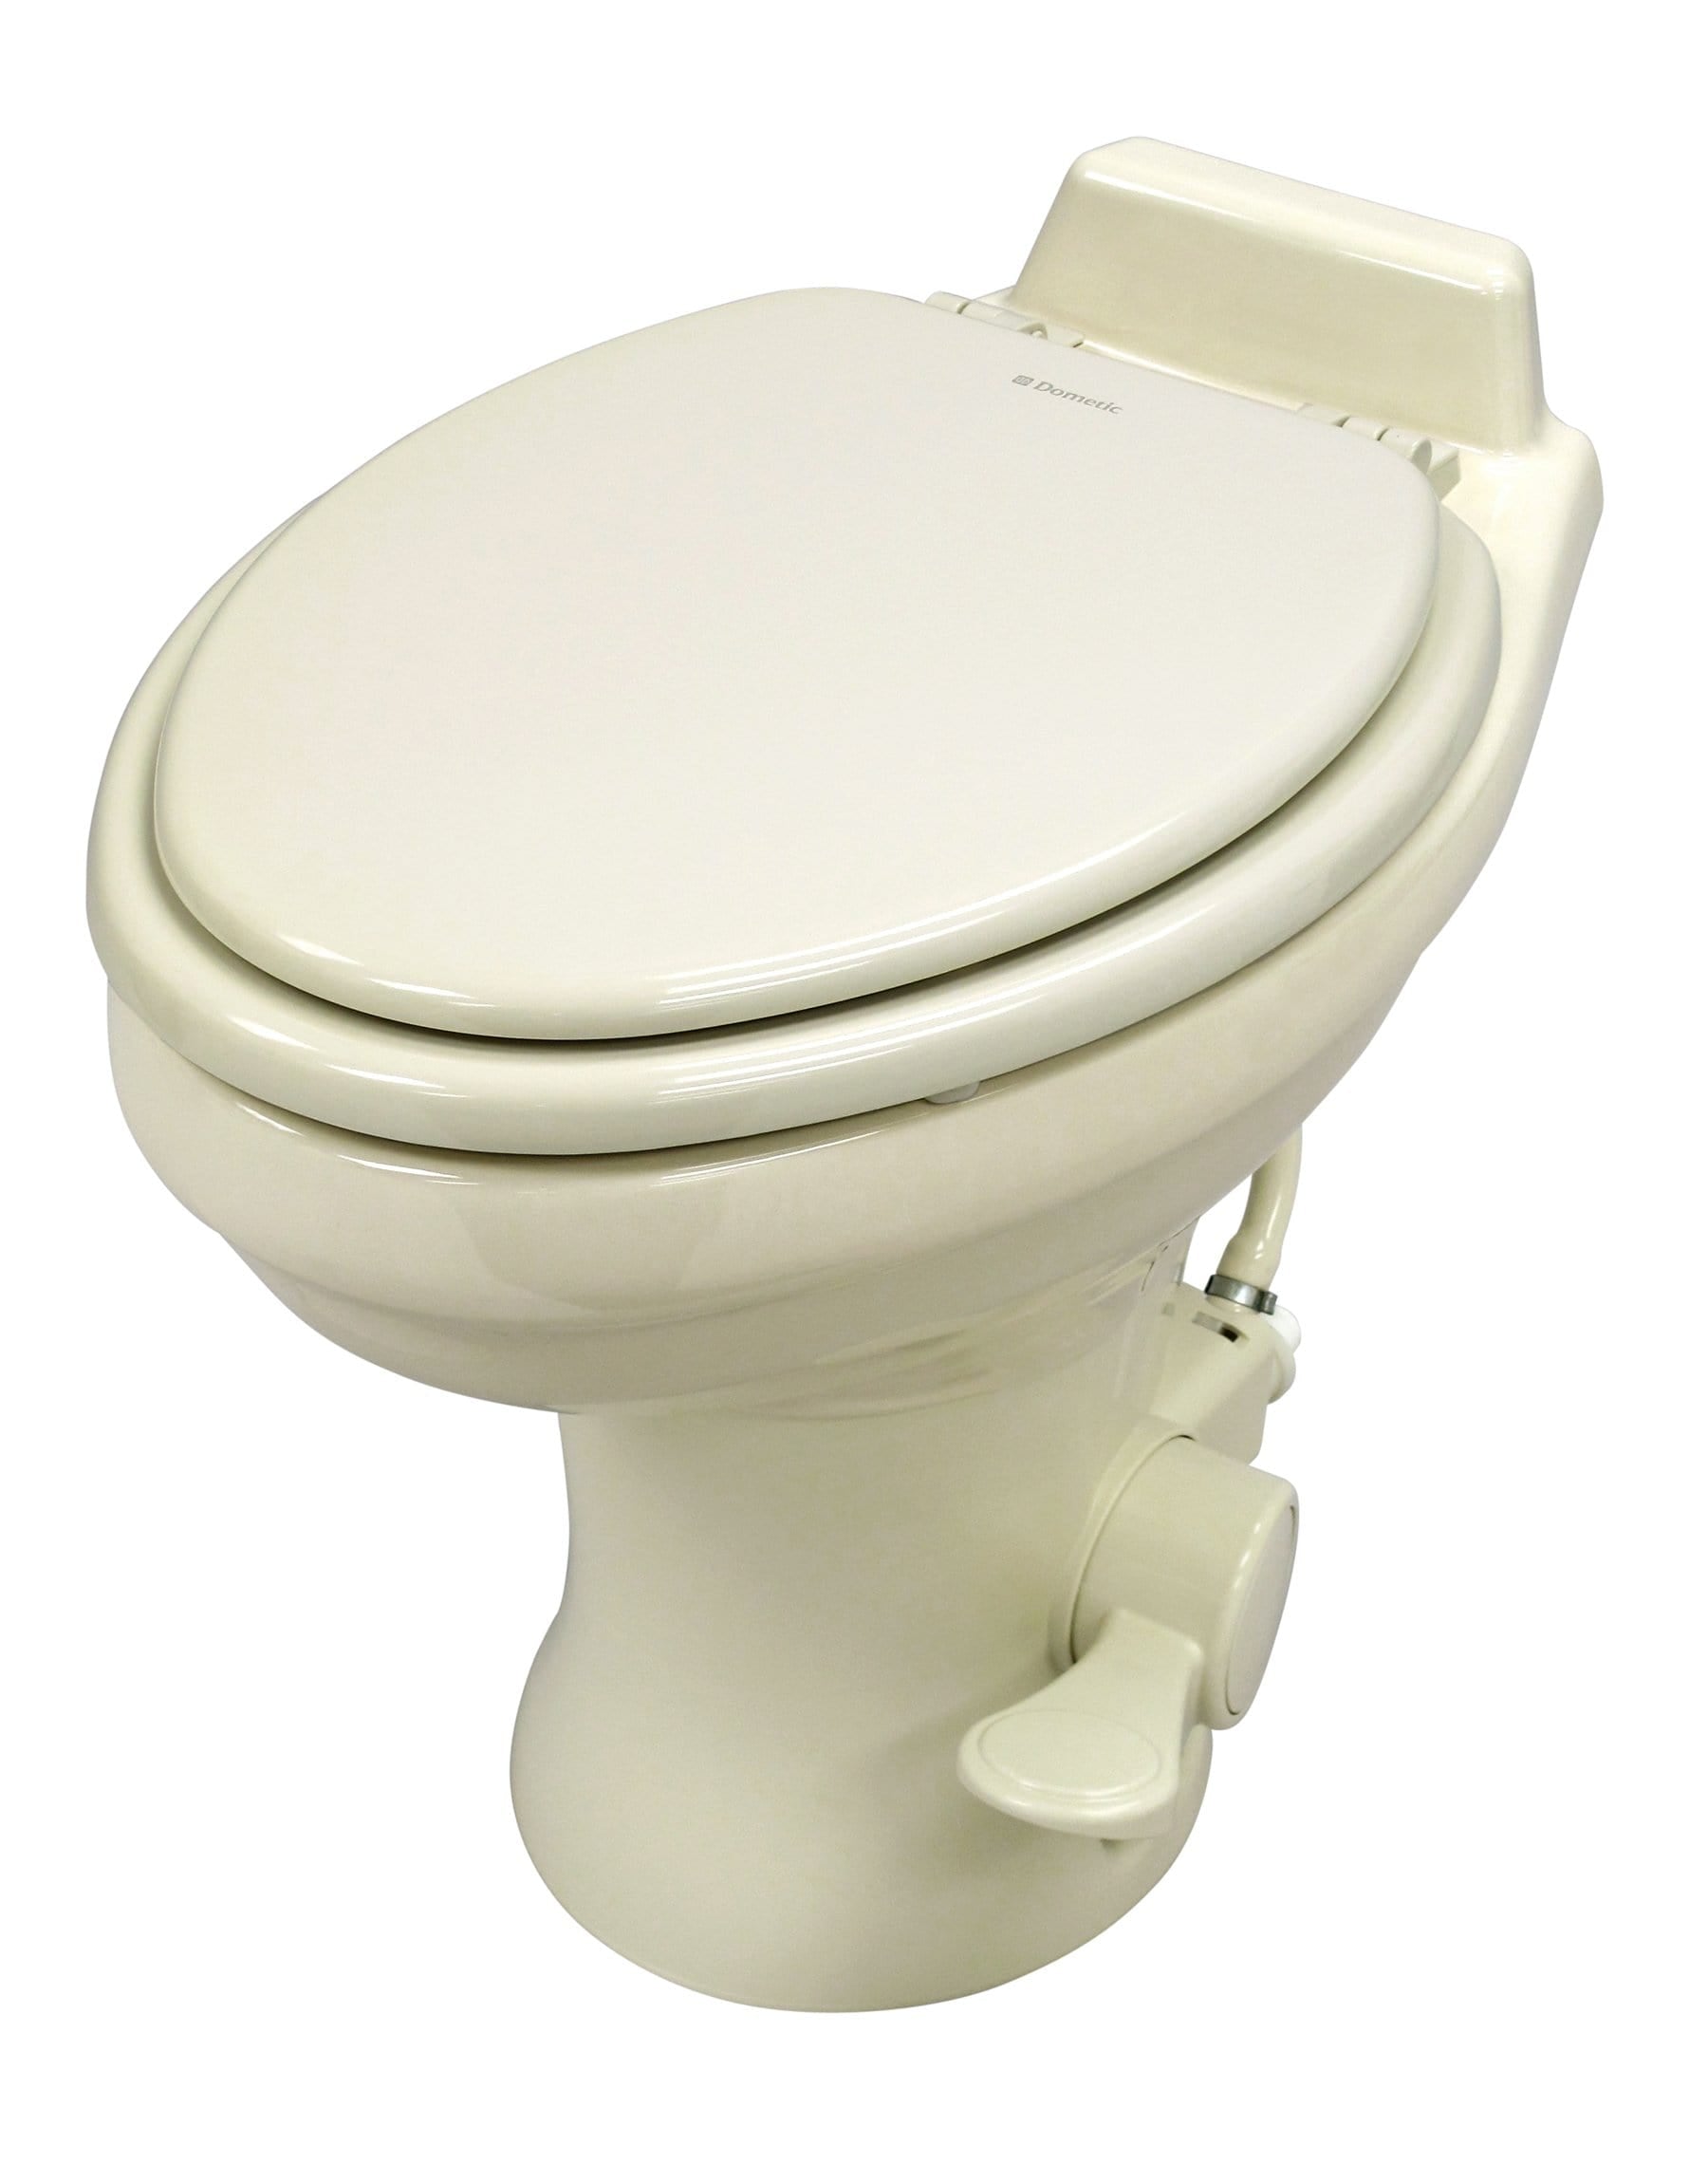 Dometic 302320183 320S Bone Color Standard Height Gravity Flush Ceramic Toilet With Hand Spray